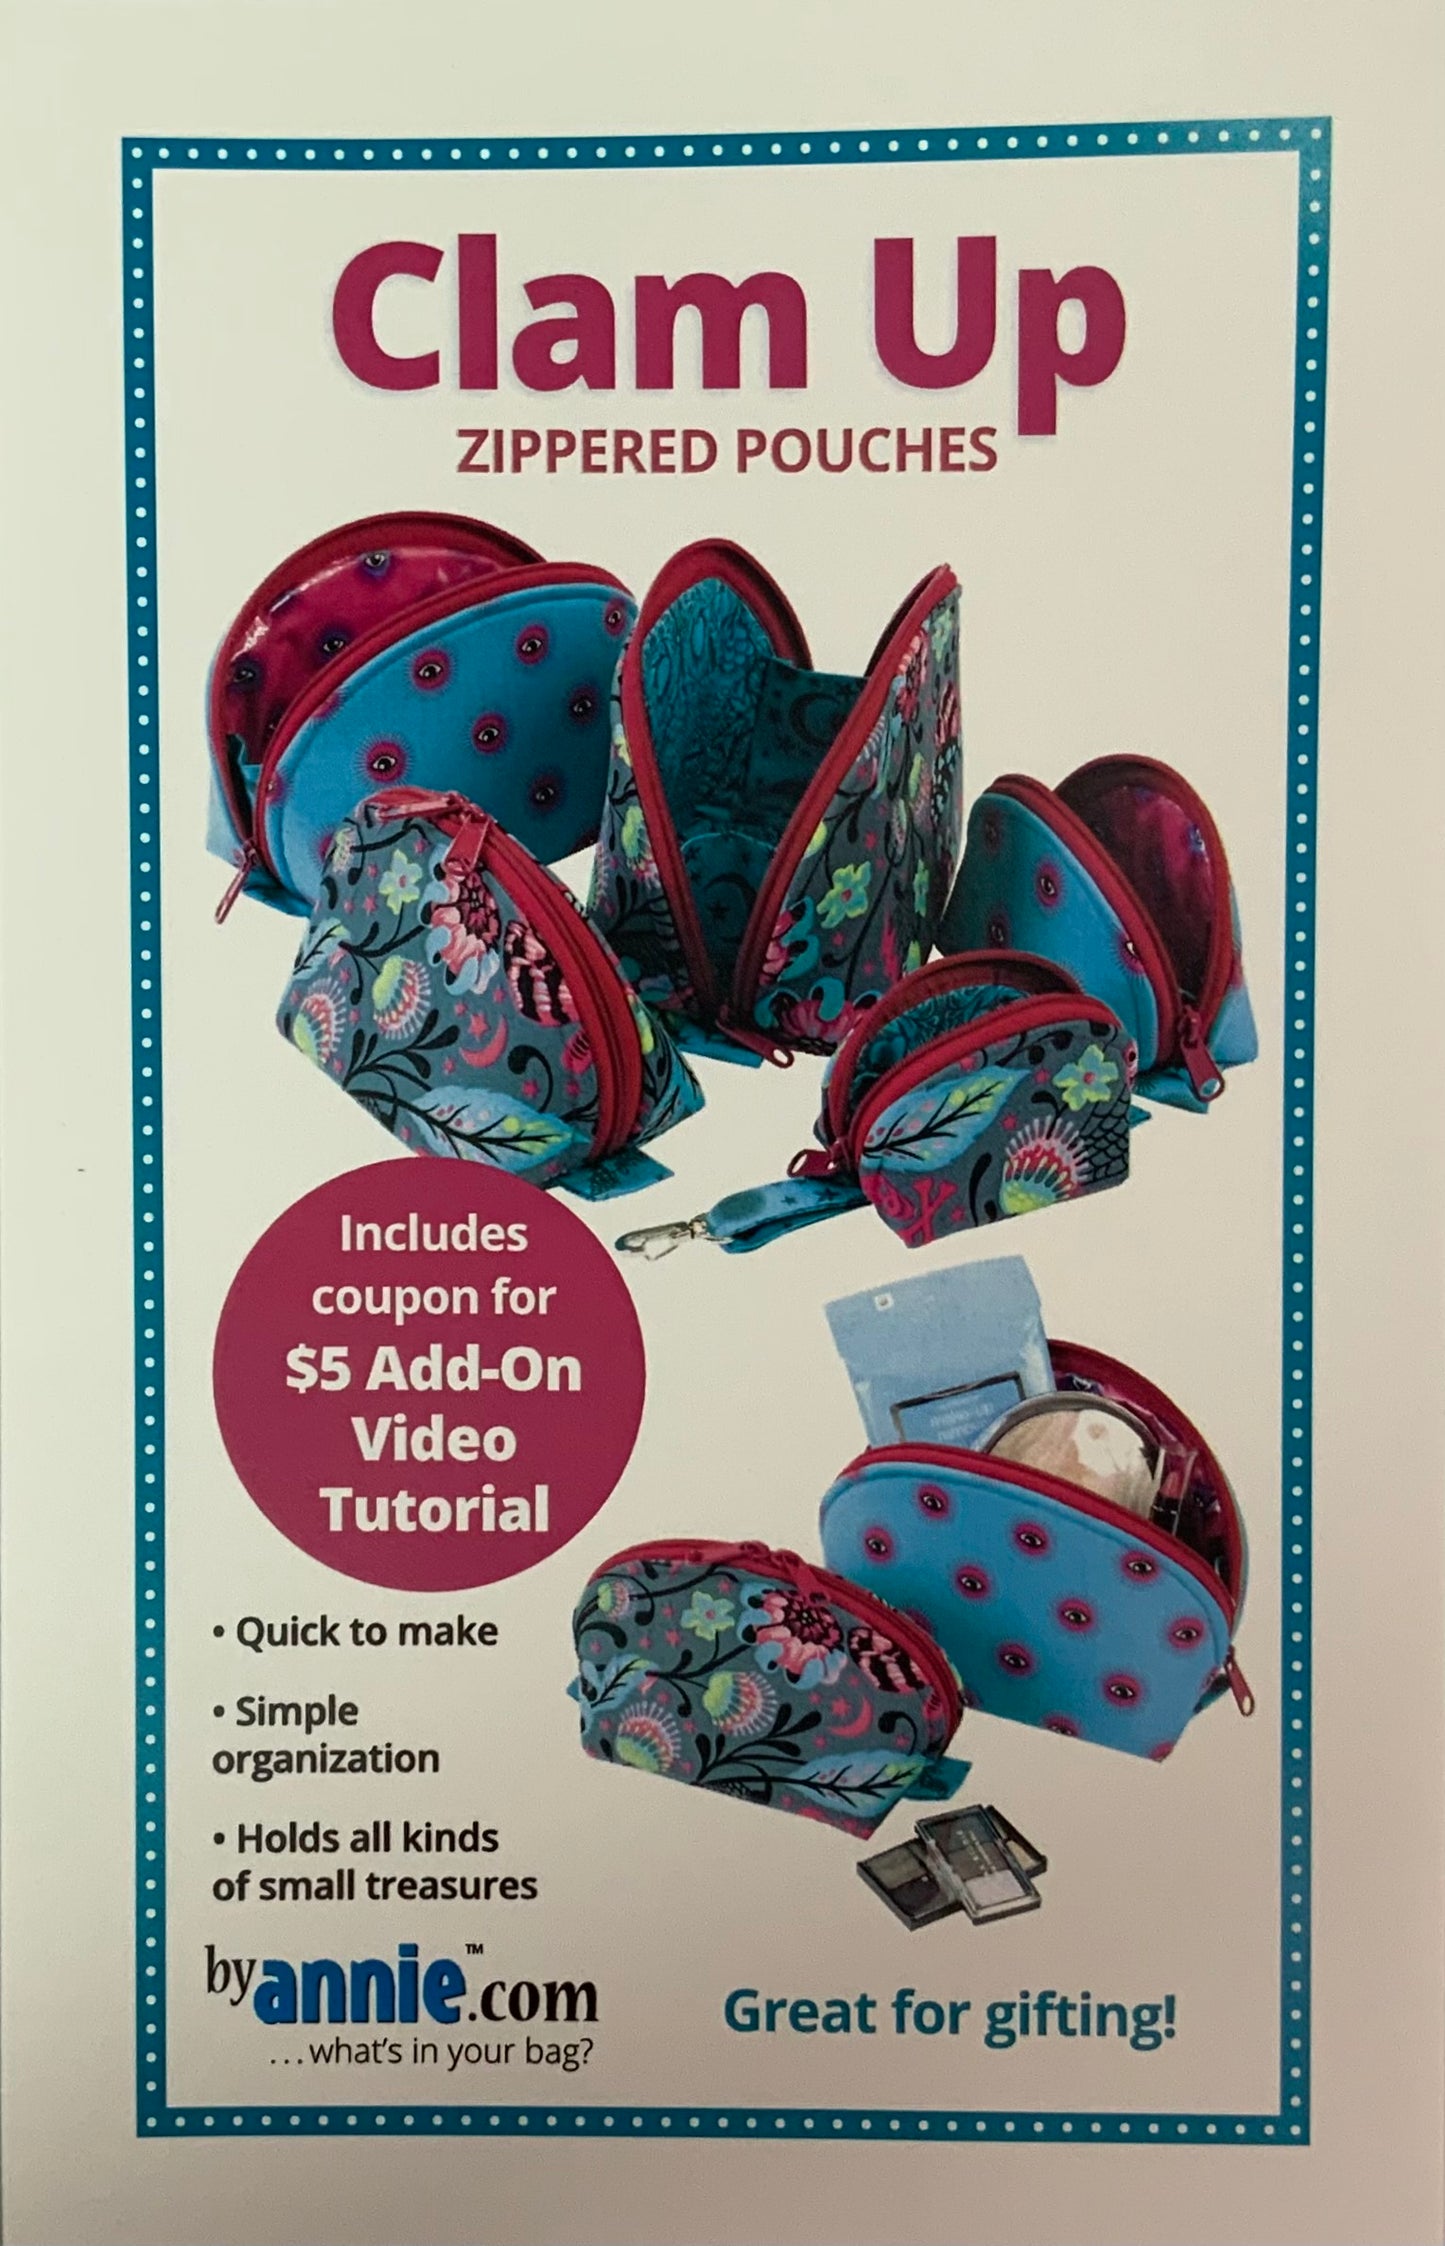 By Annie - Clam up zippered pouches